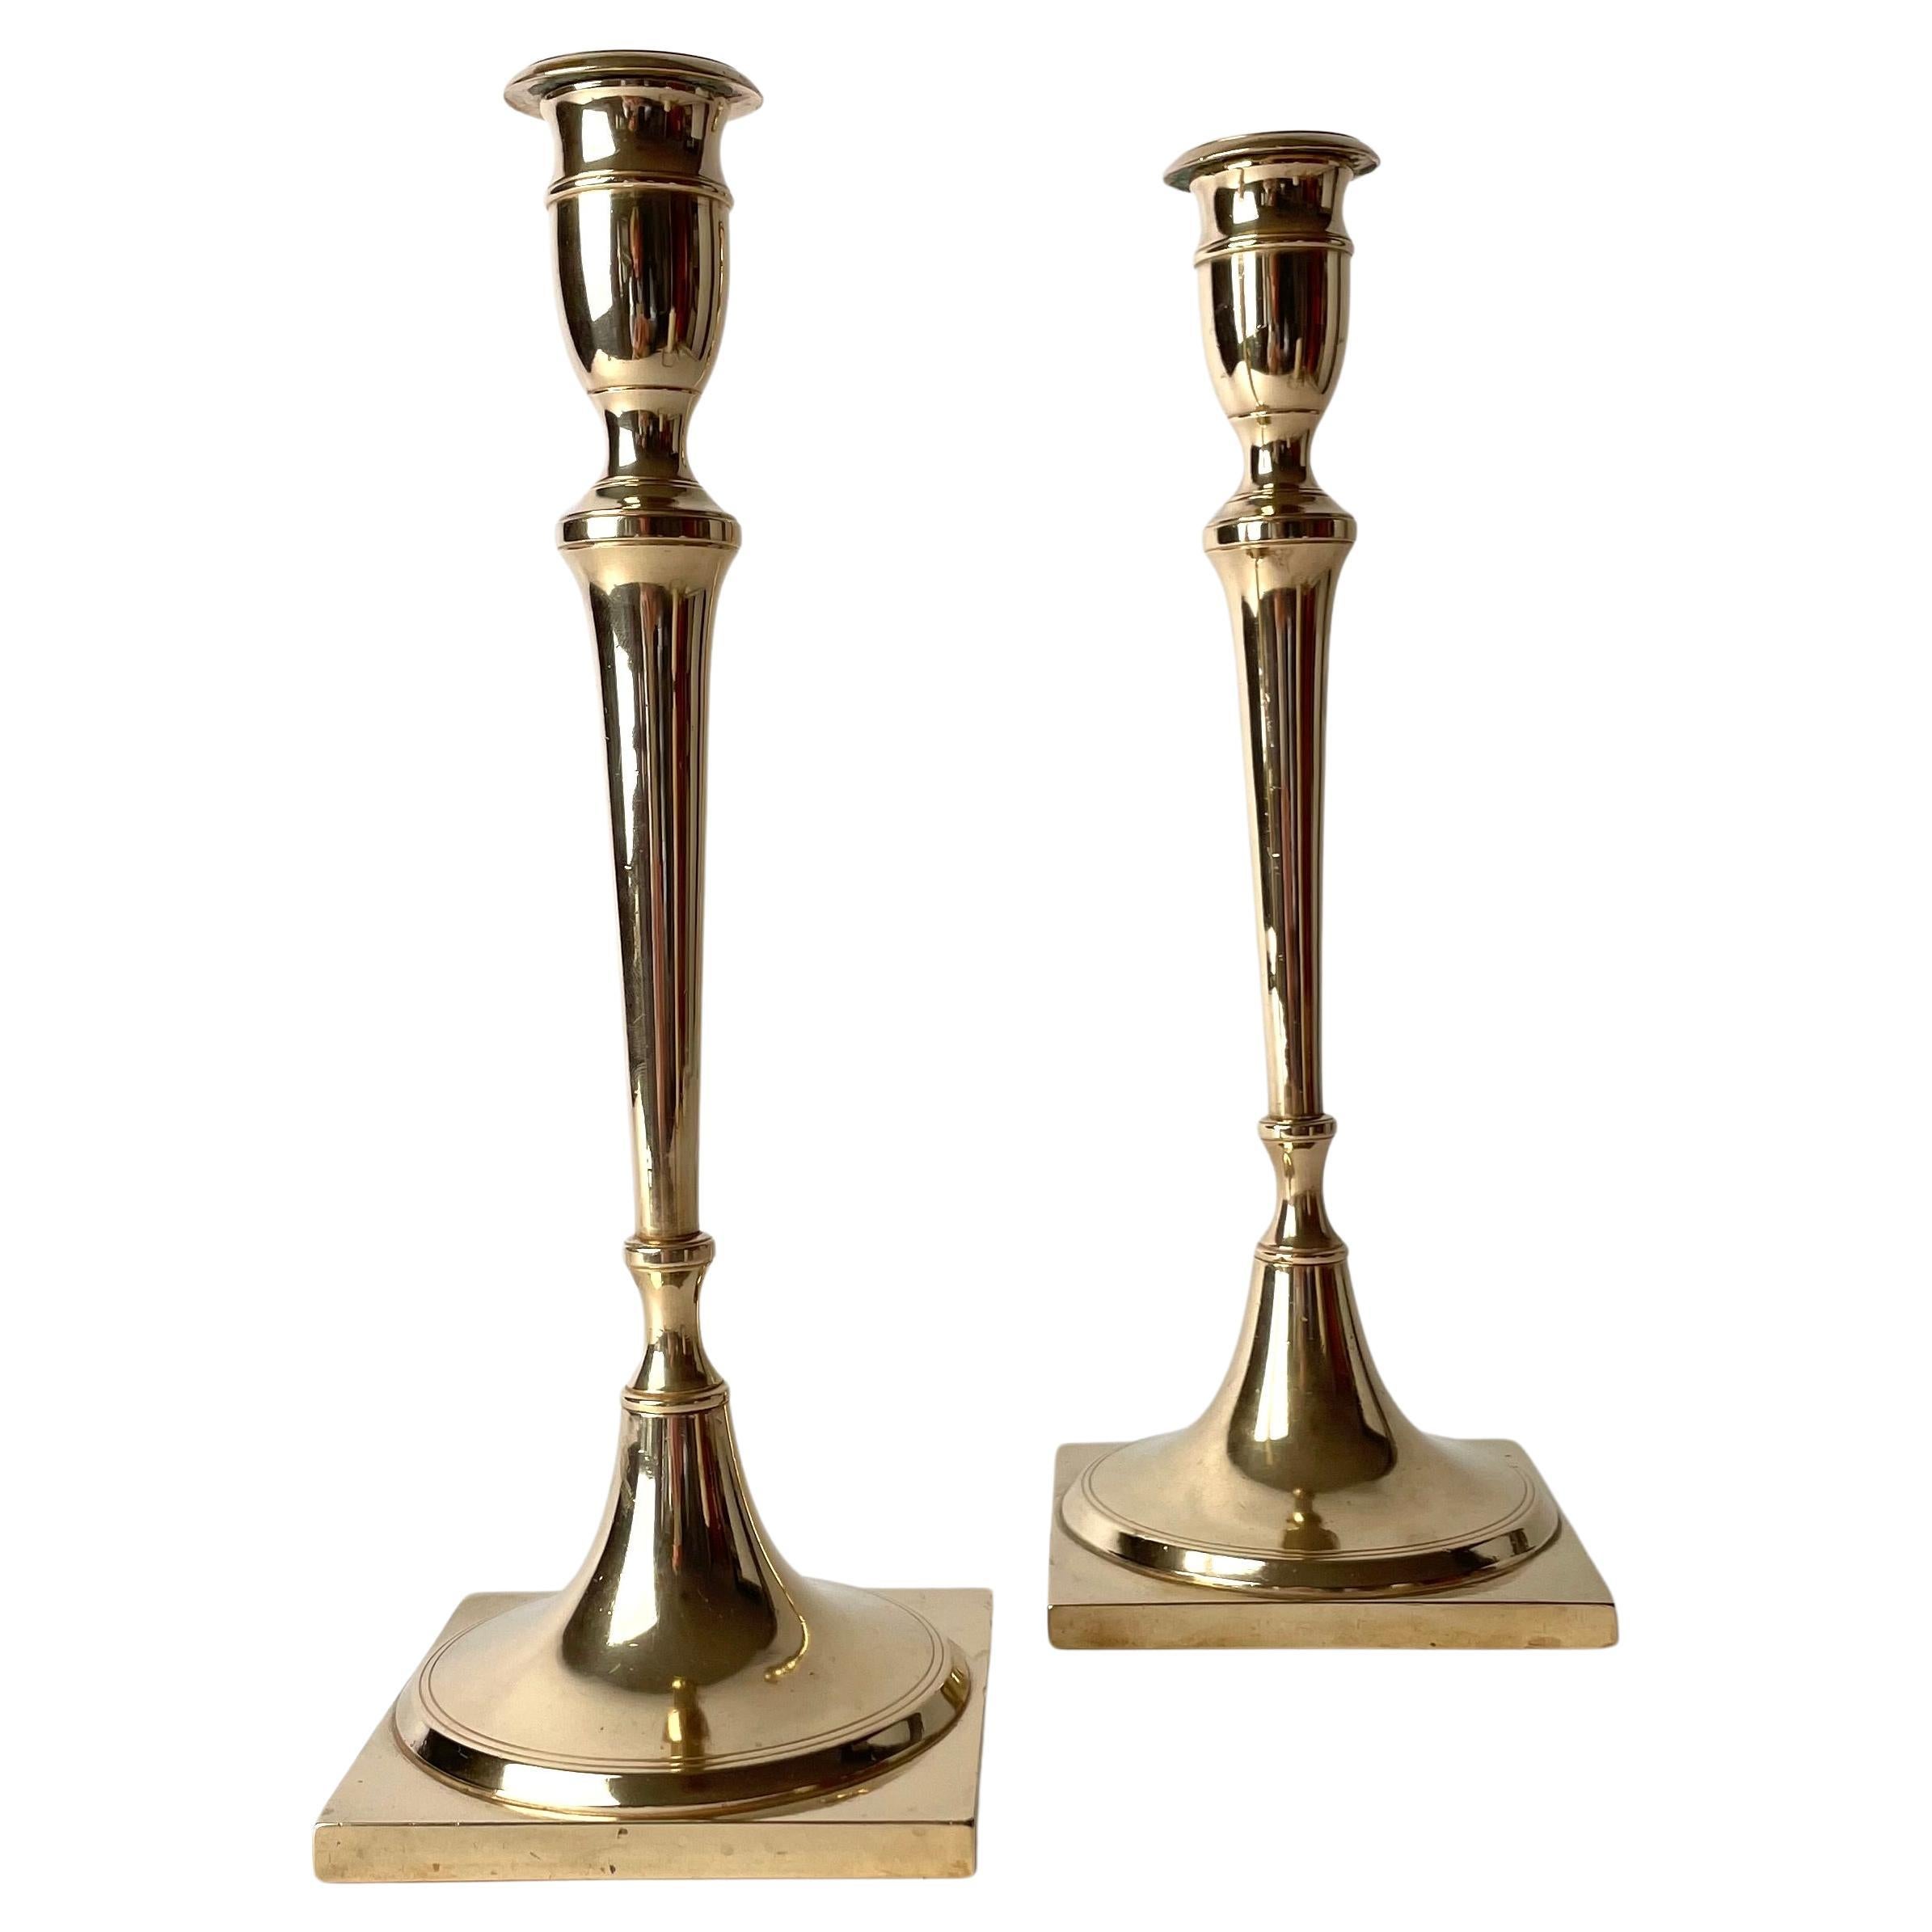 Elegant and large pair of Brass Candlesticks. Swedish Karl Johan from the 1820s.